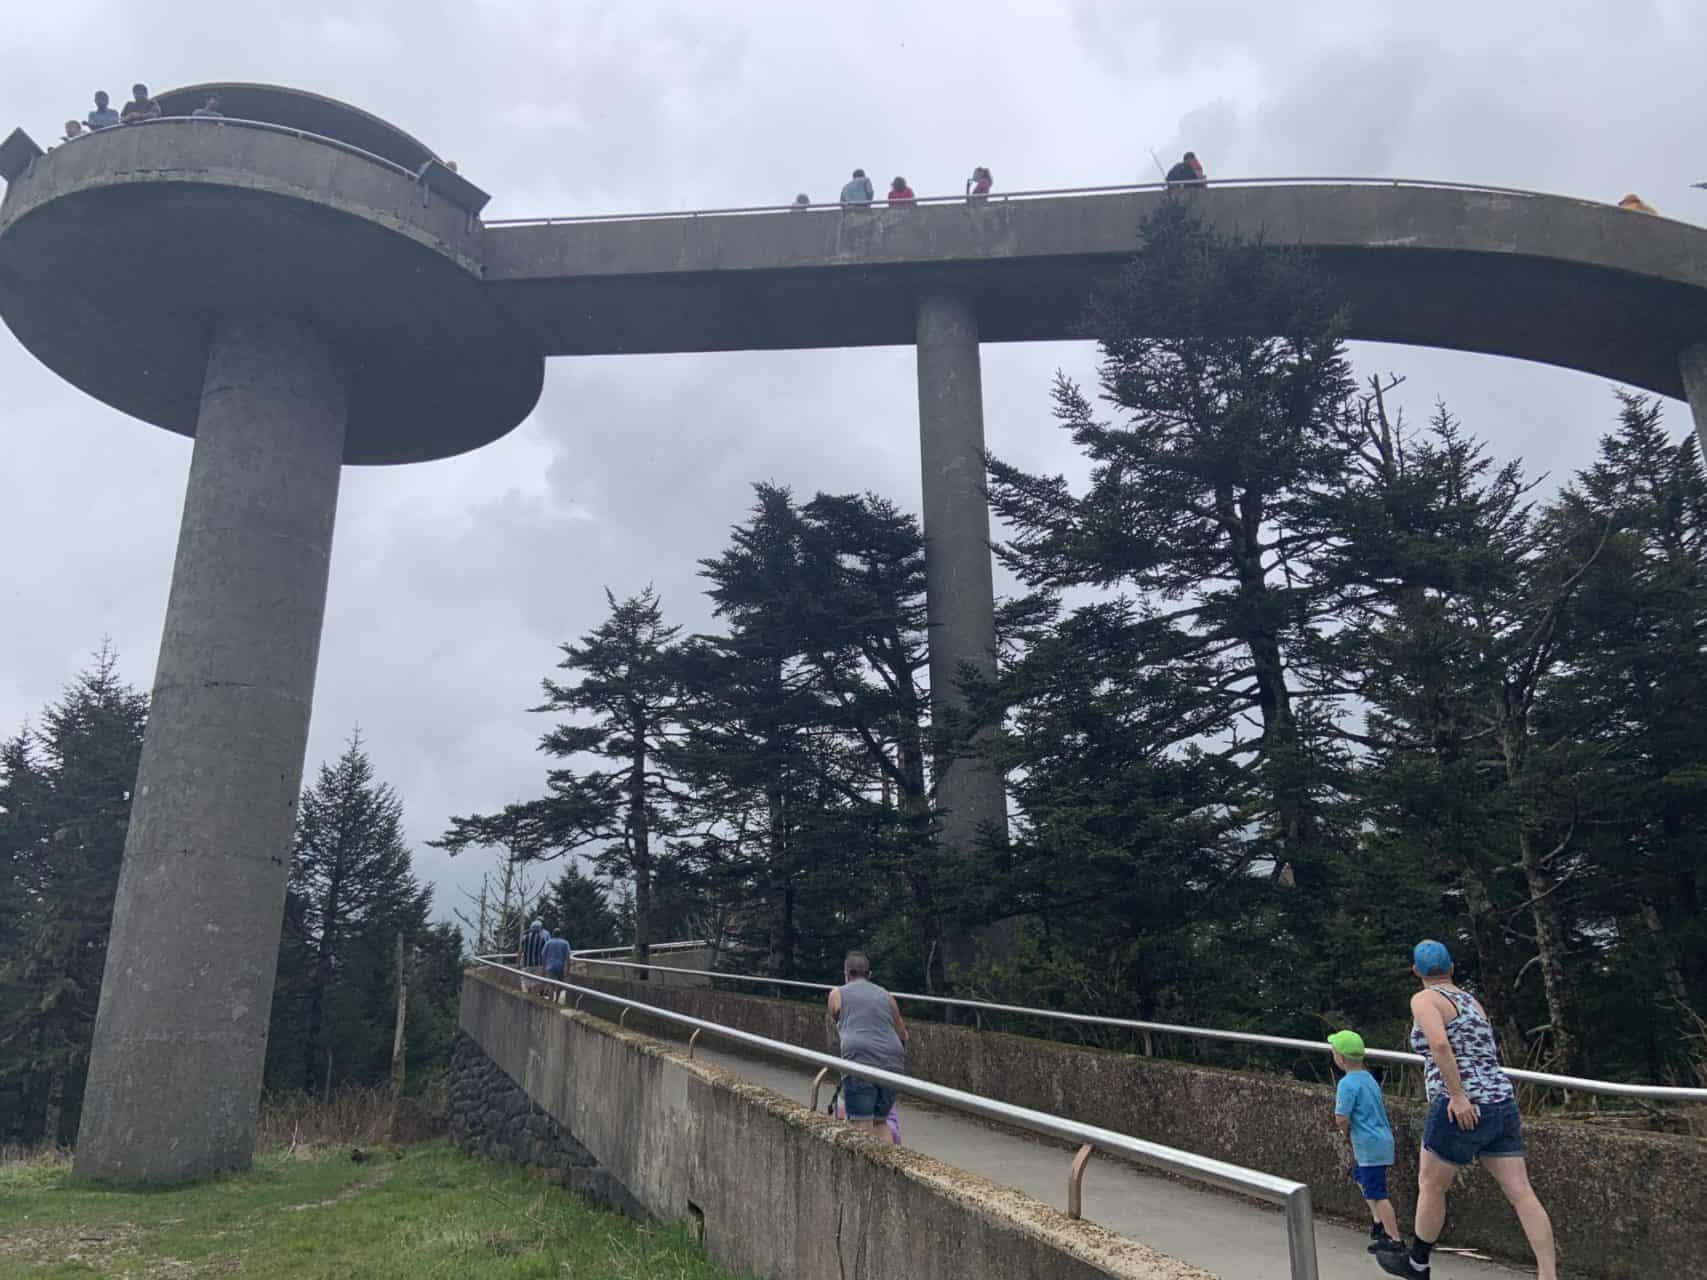 Clingmans Dome tower